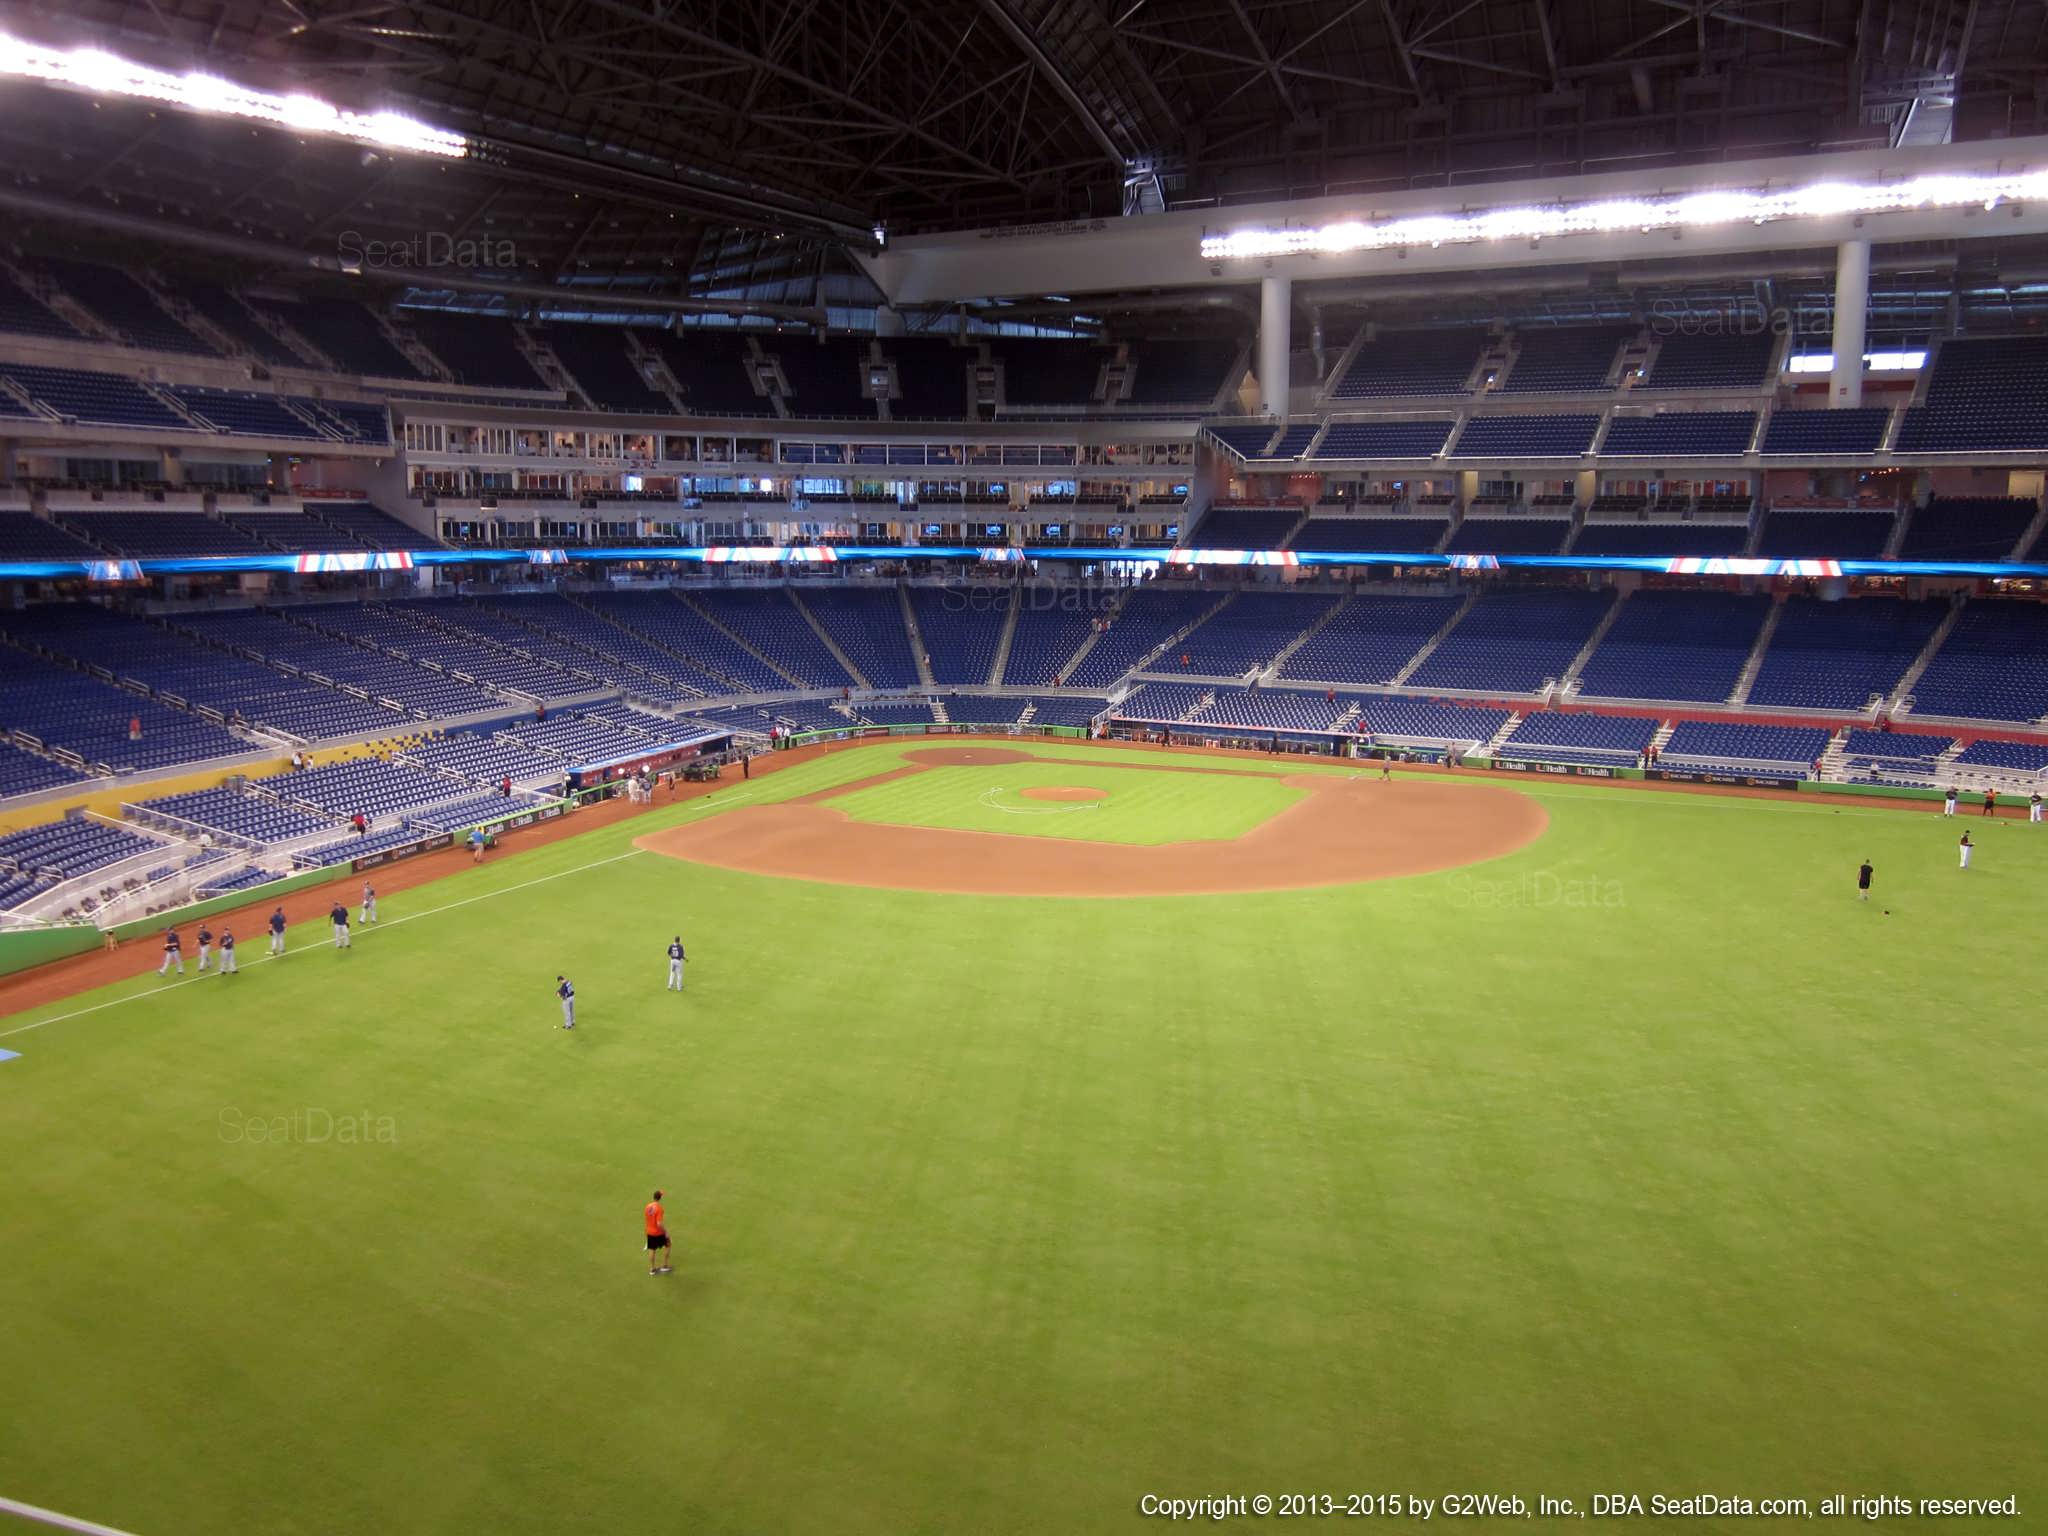 Seat view from section 137 at Marlins Park, home of the Miami Marlins